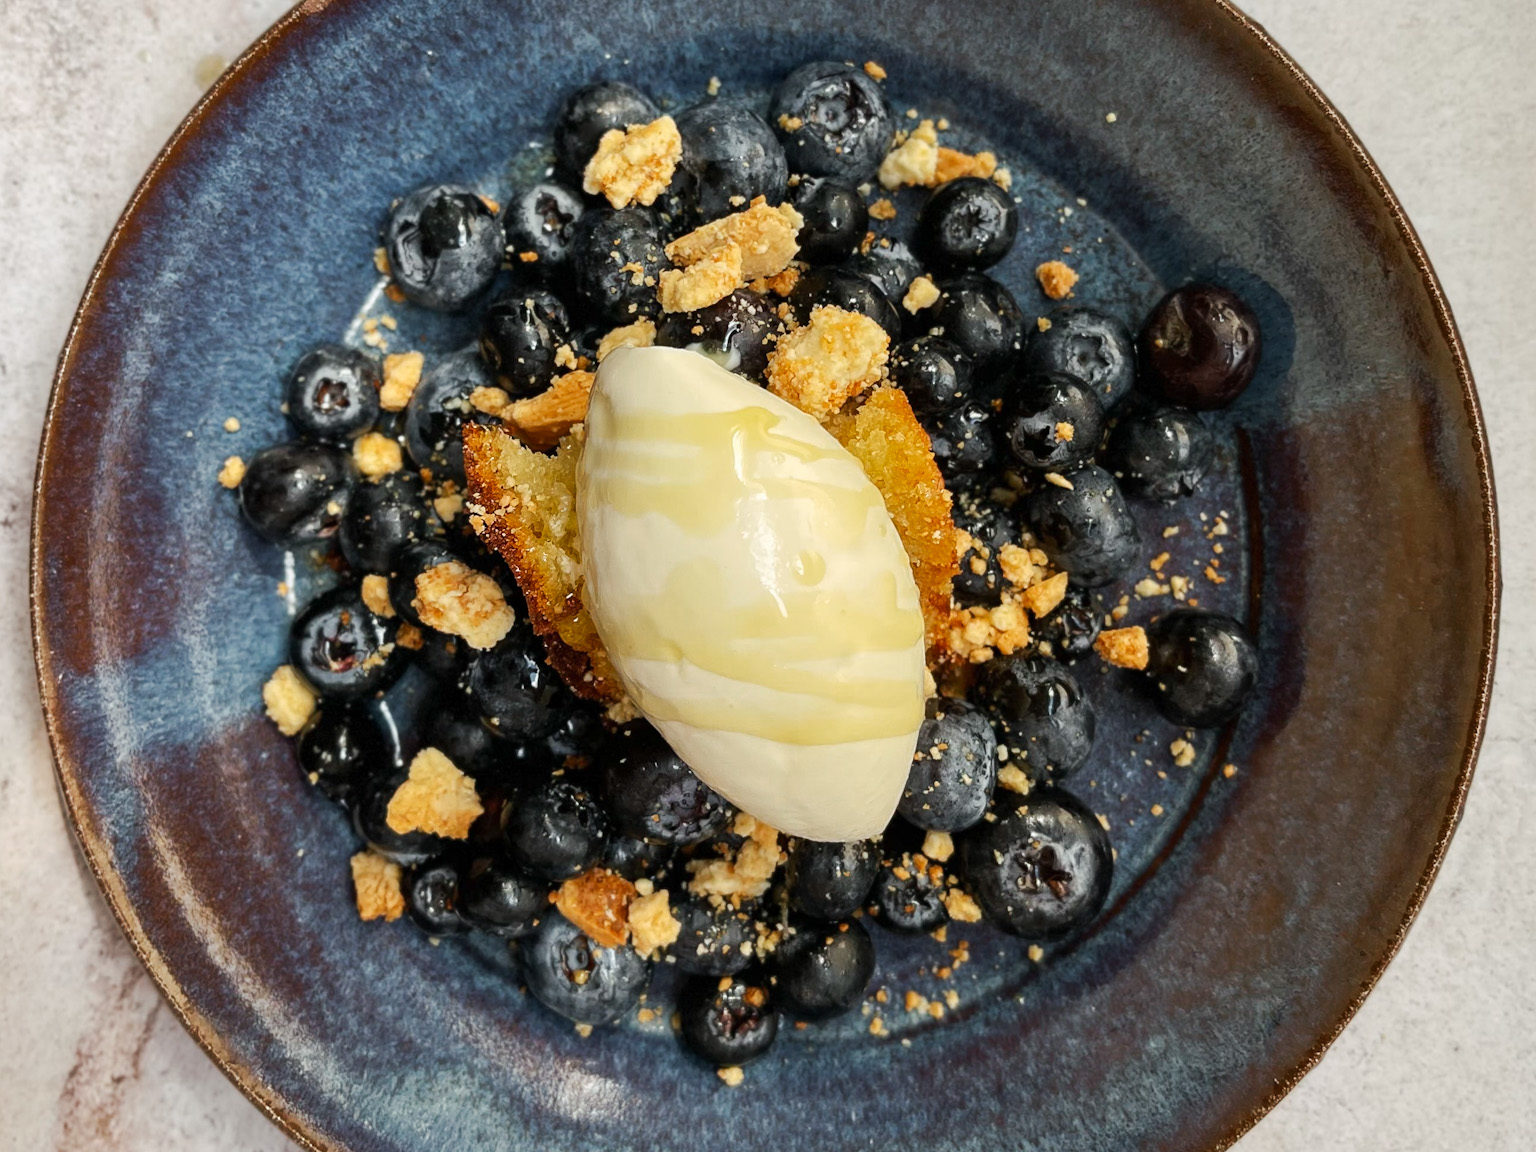 Fancy Frozen Yogurt With Olive Oil, White Chocolate, And Blueberries